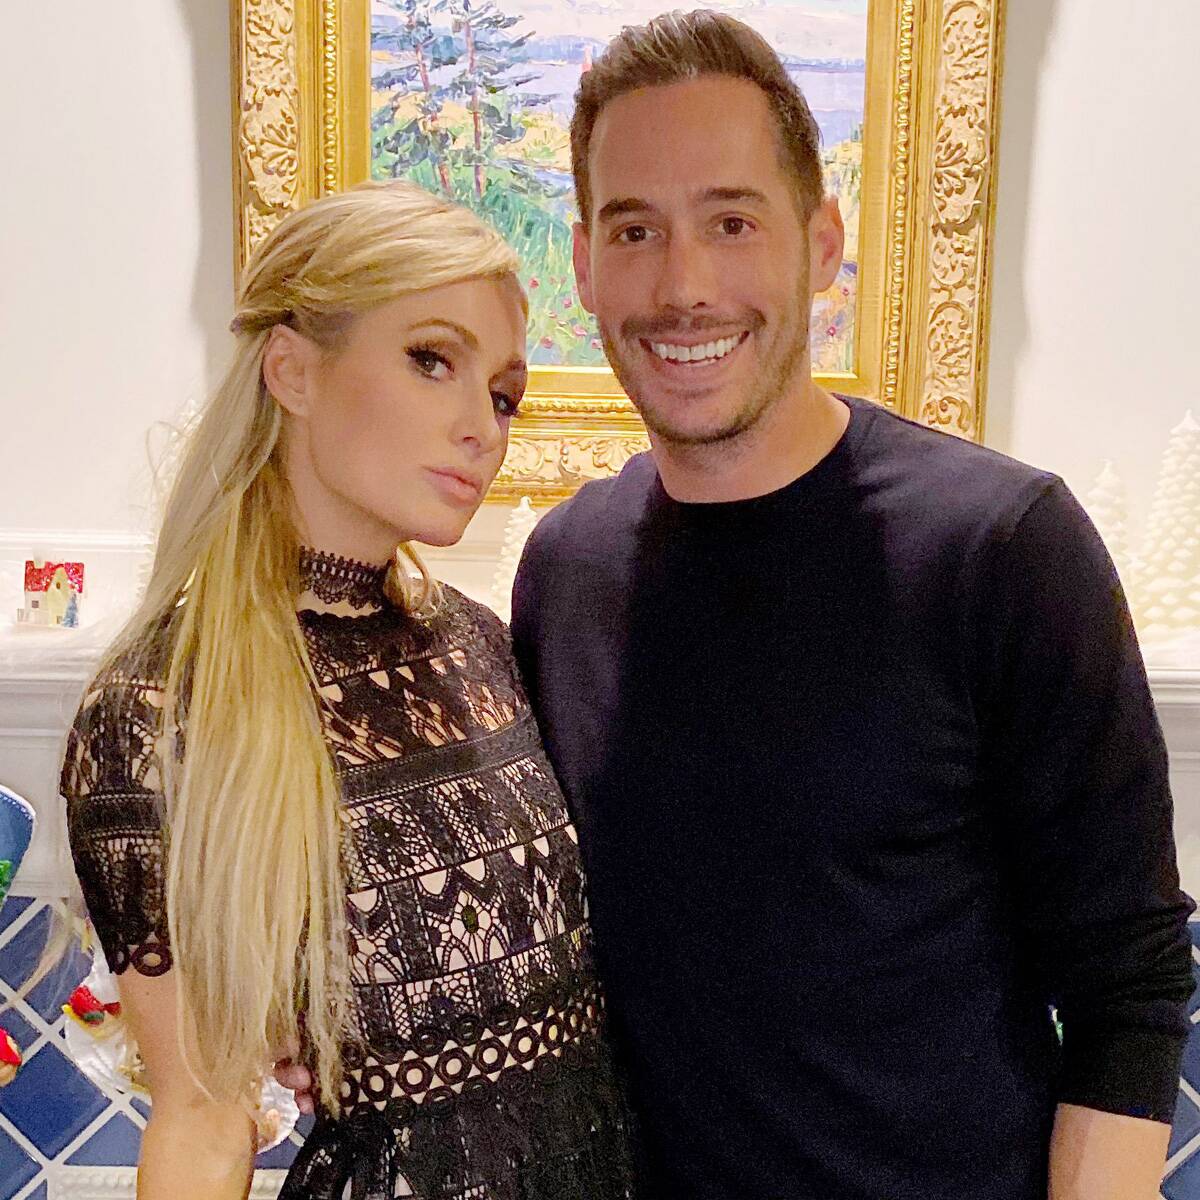 Paris Hilton Proves Boyfriend Carter Reum Is Her Muse In New "Heartbeat" Music Video